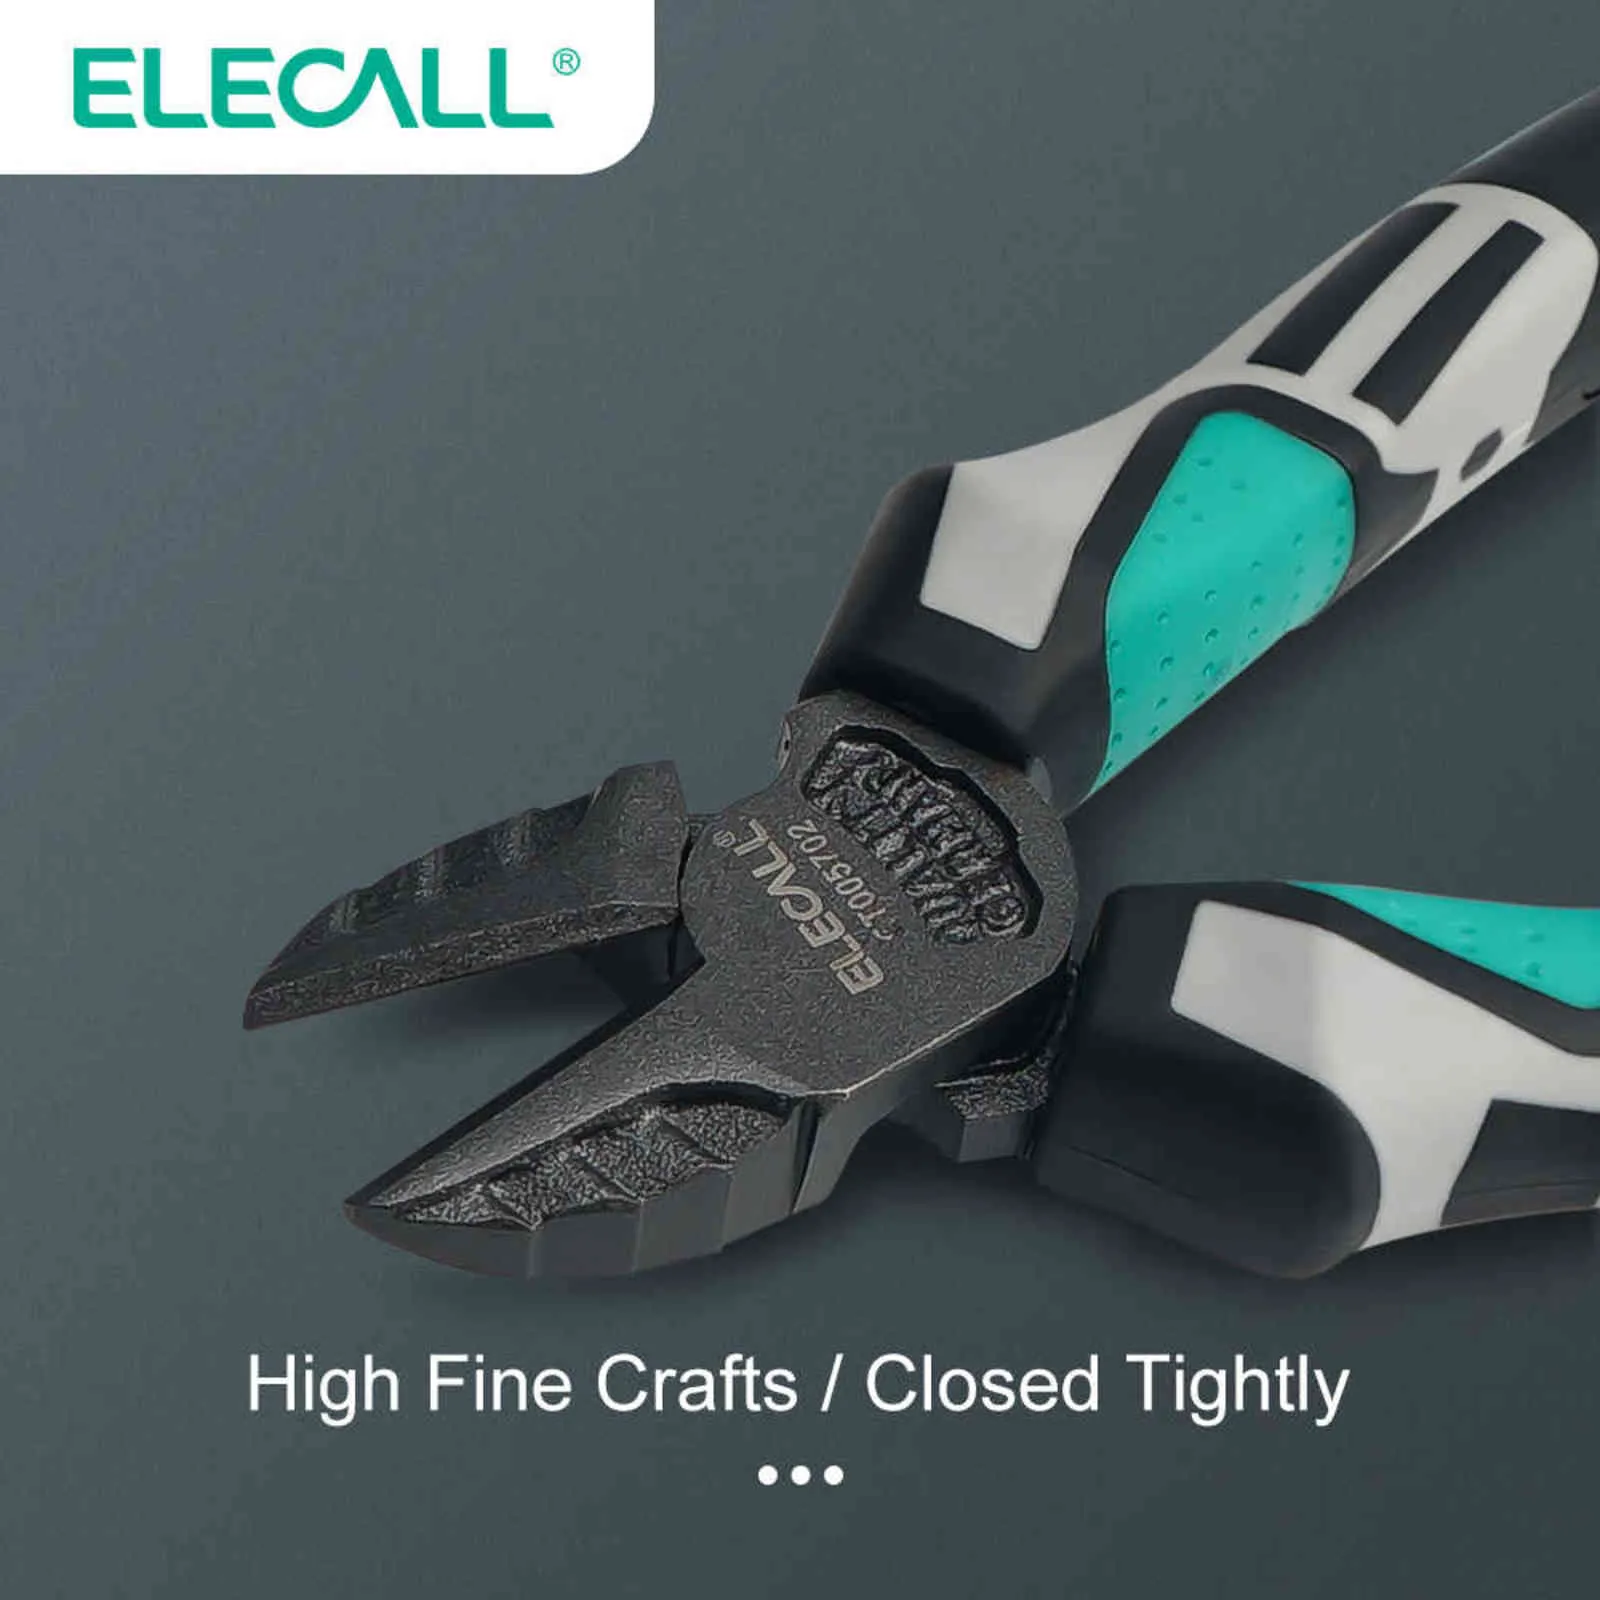 ELECALL Wire cutter pliers 6 7 Diagonal pliers cutting nipper wire stripper plier hand tools for cable cutters electri256q